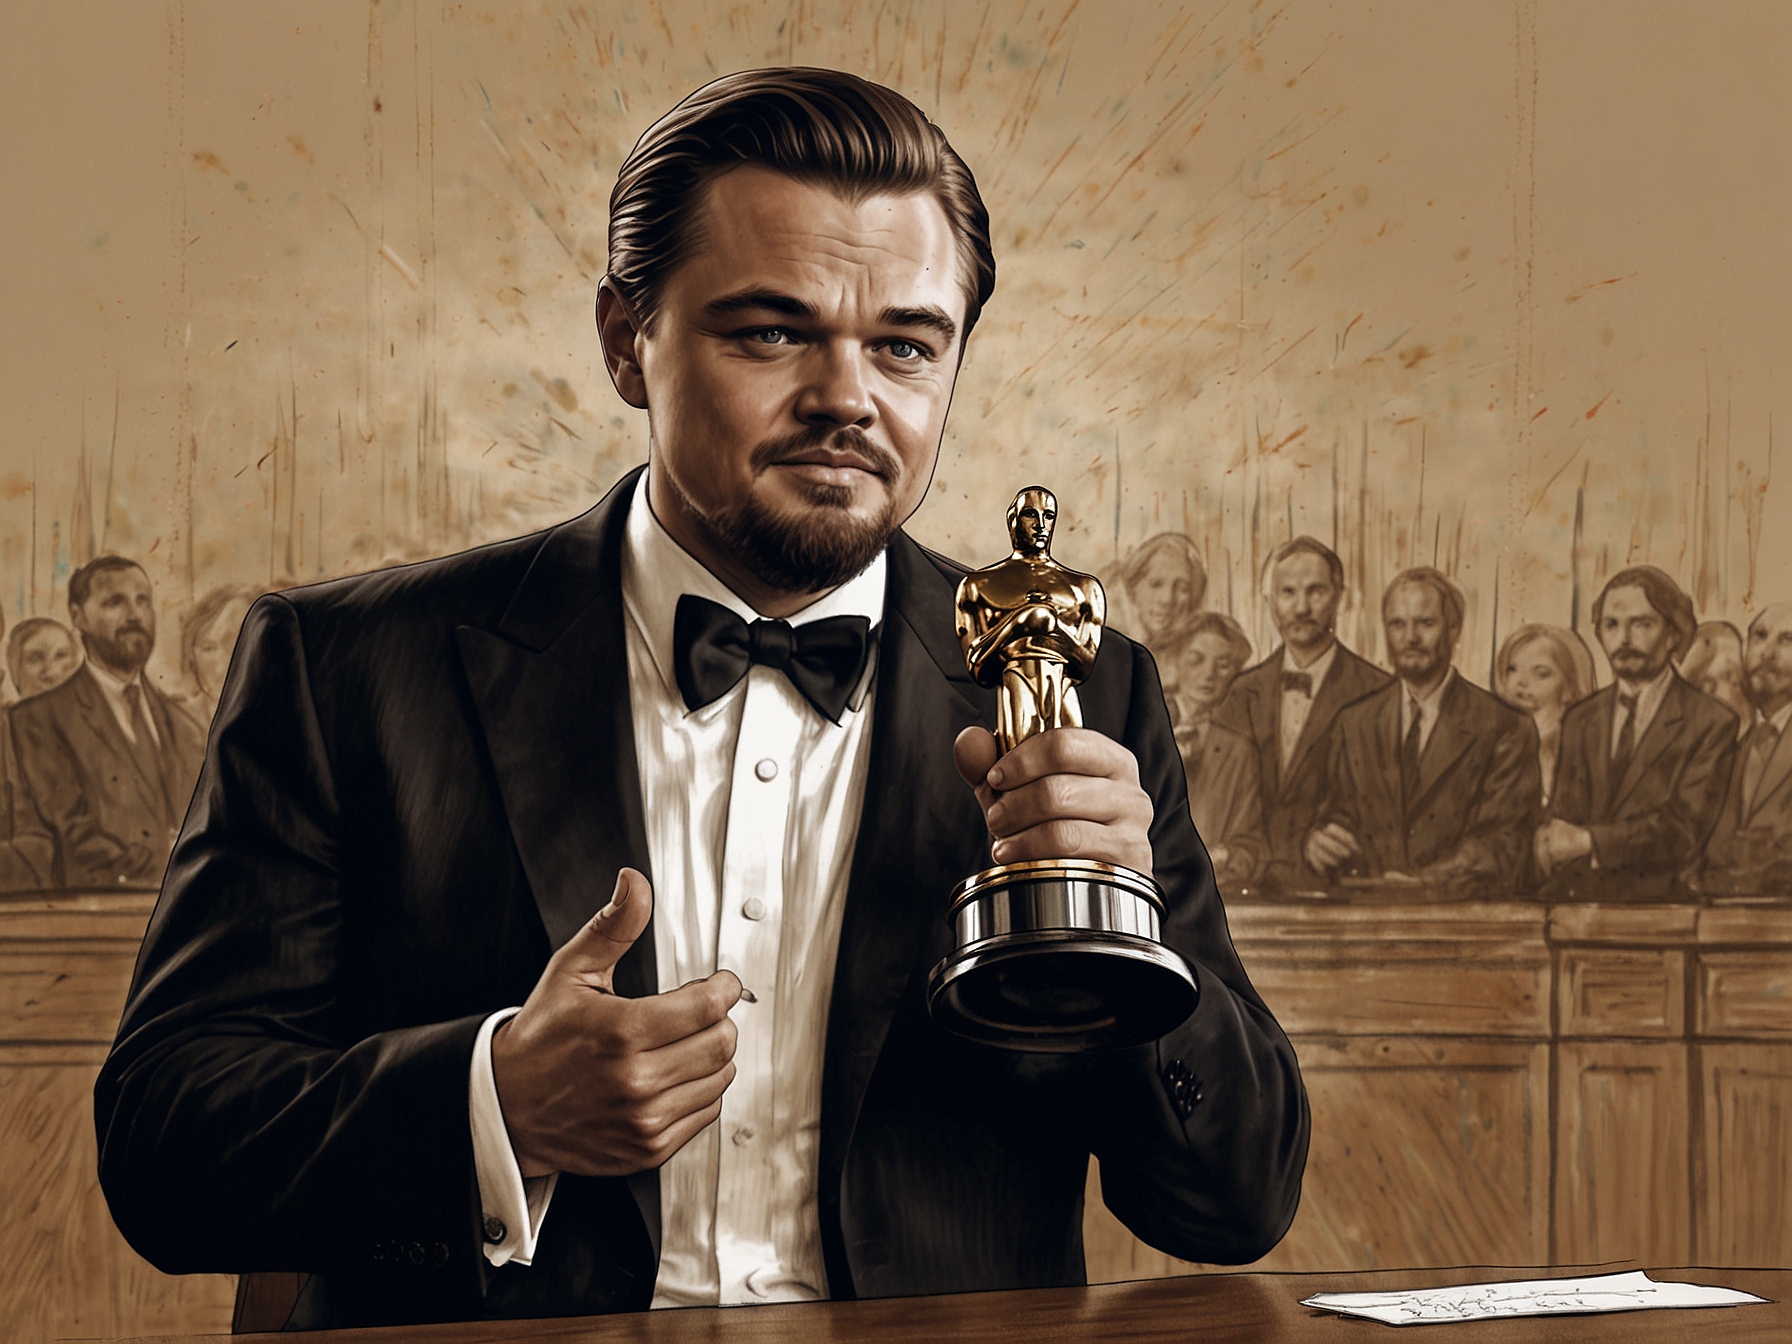 Leonardo DiCaprio holding his Oscar for Best Actor for his role in 'The Revenant,' celebrating a significant milestone in his illustrious acting career.